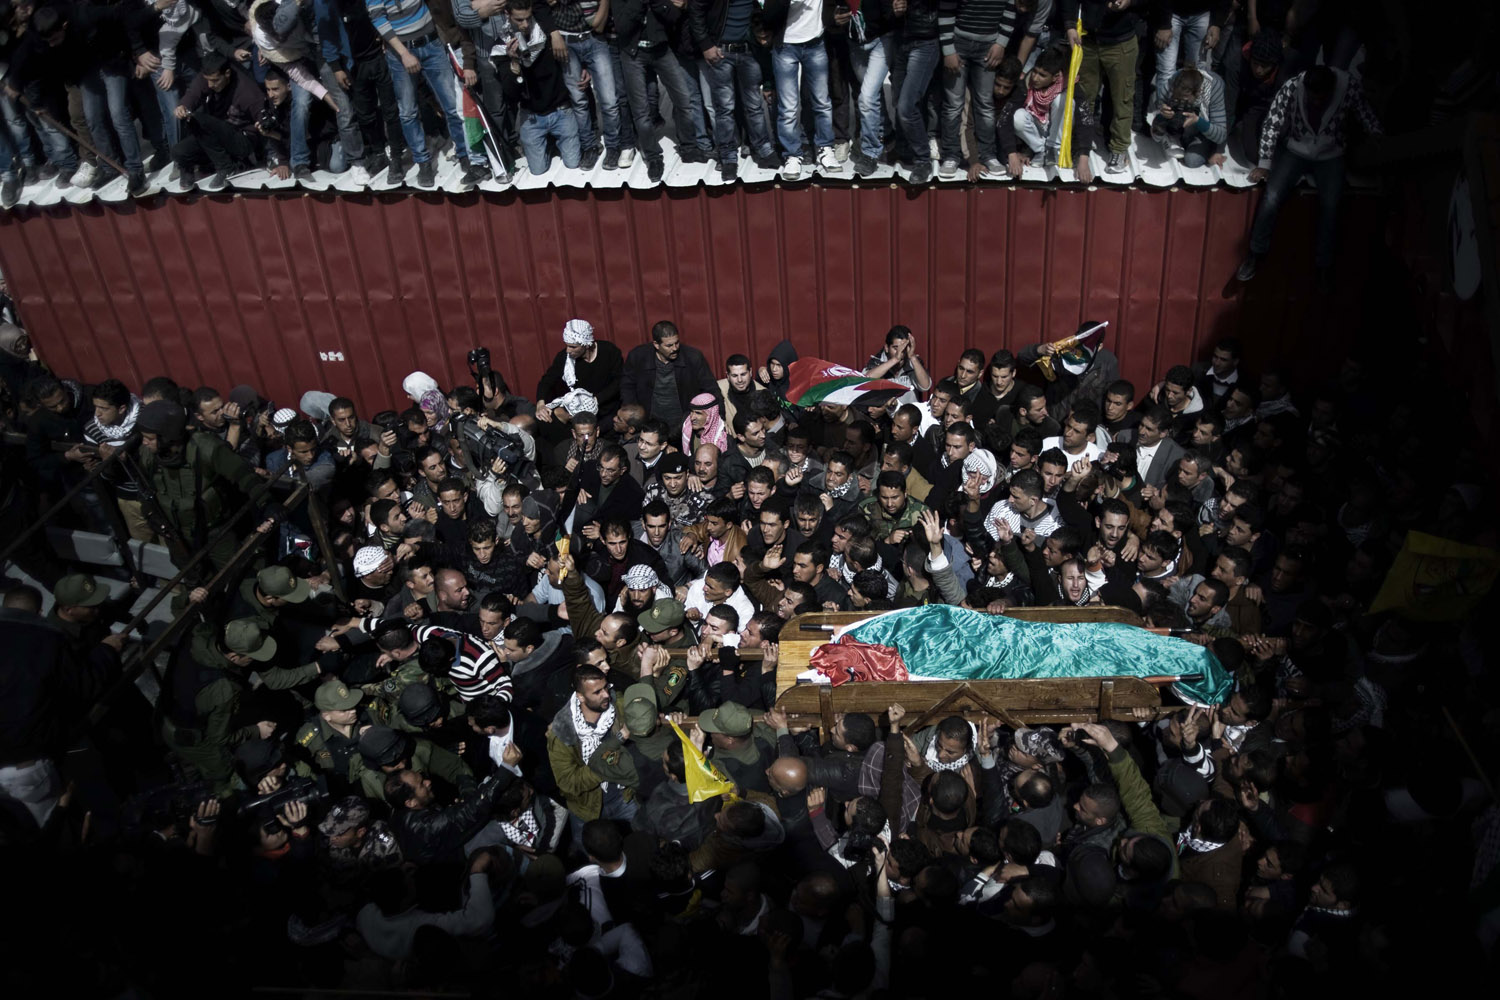 Feb. 25, 2013. Mourners of Arafat Jaradat  are seen as they mourn his coffin in the Palestinian village of Saair.